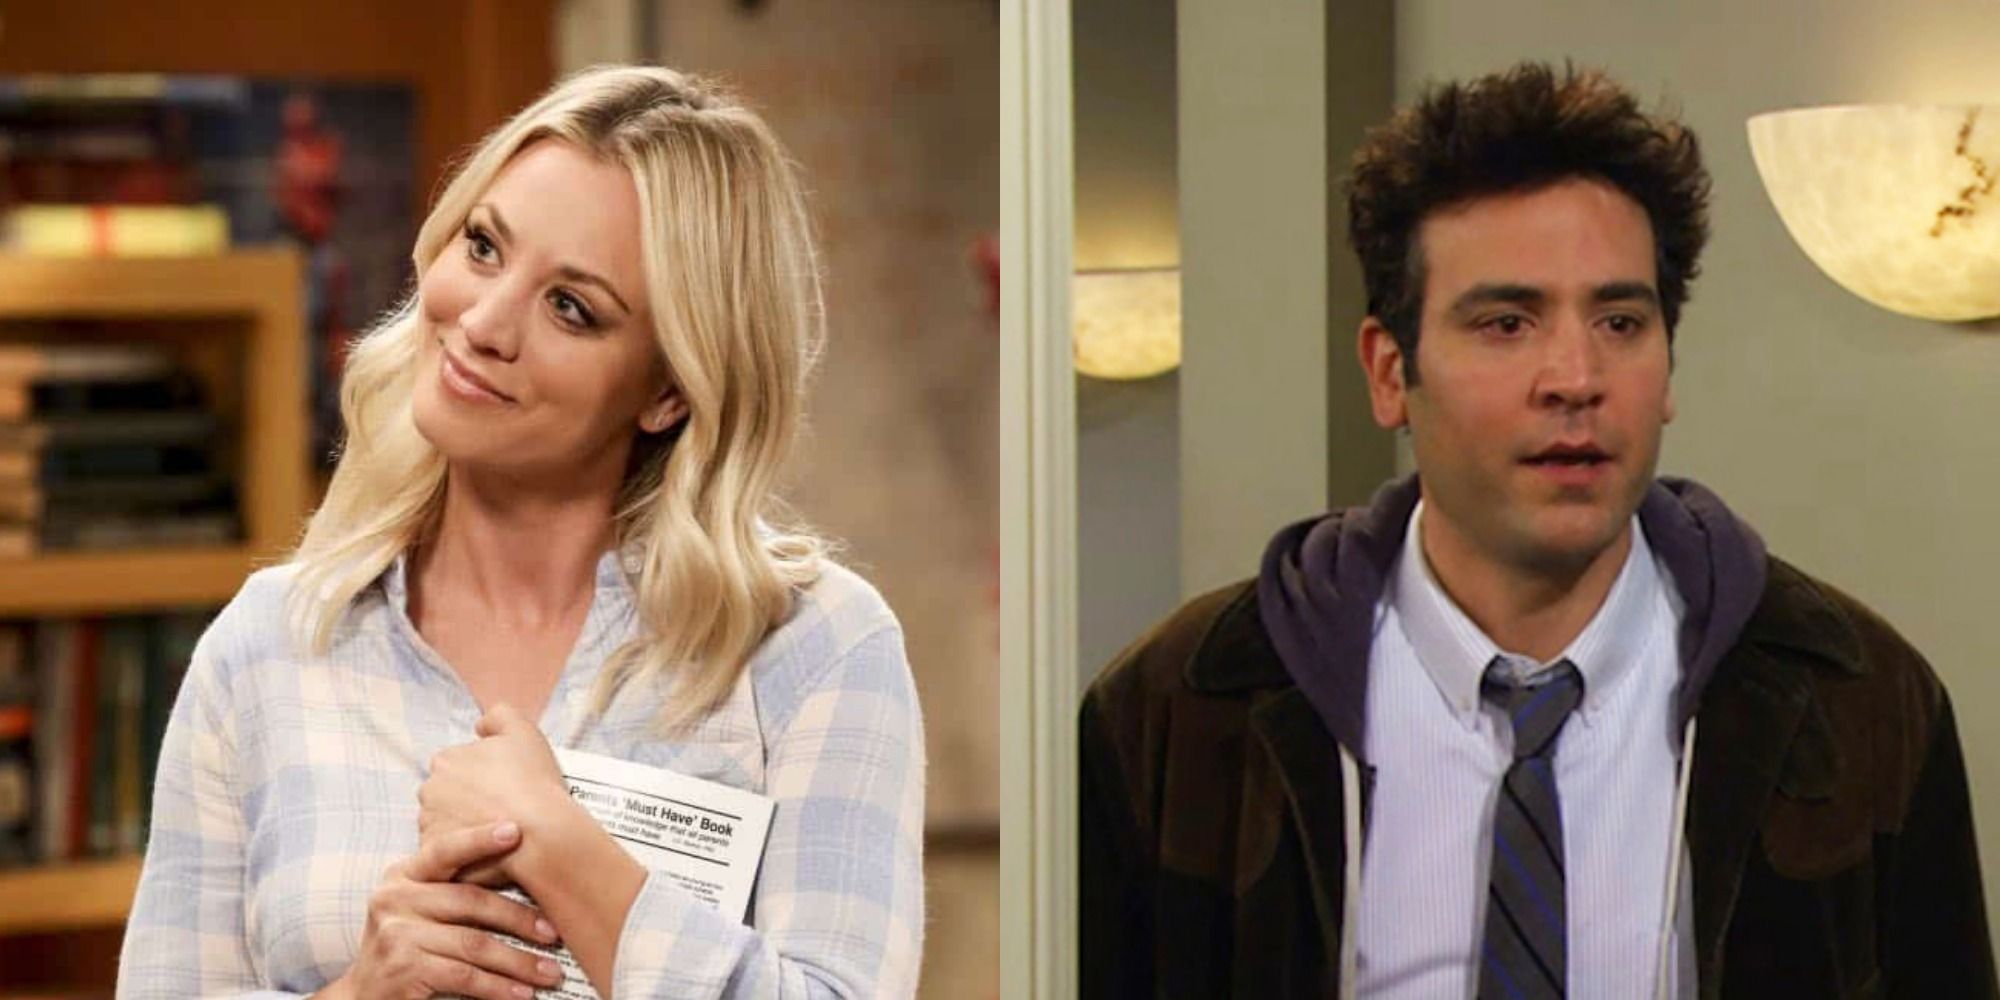 A split-screen image showing The Big Bang Theory's Penny Hofstadter and How I Met Your Mother's Ted Mosby